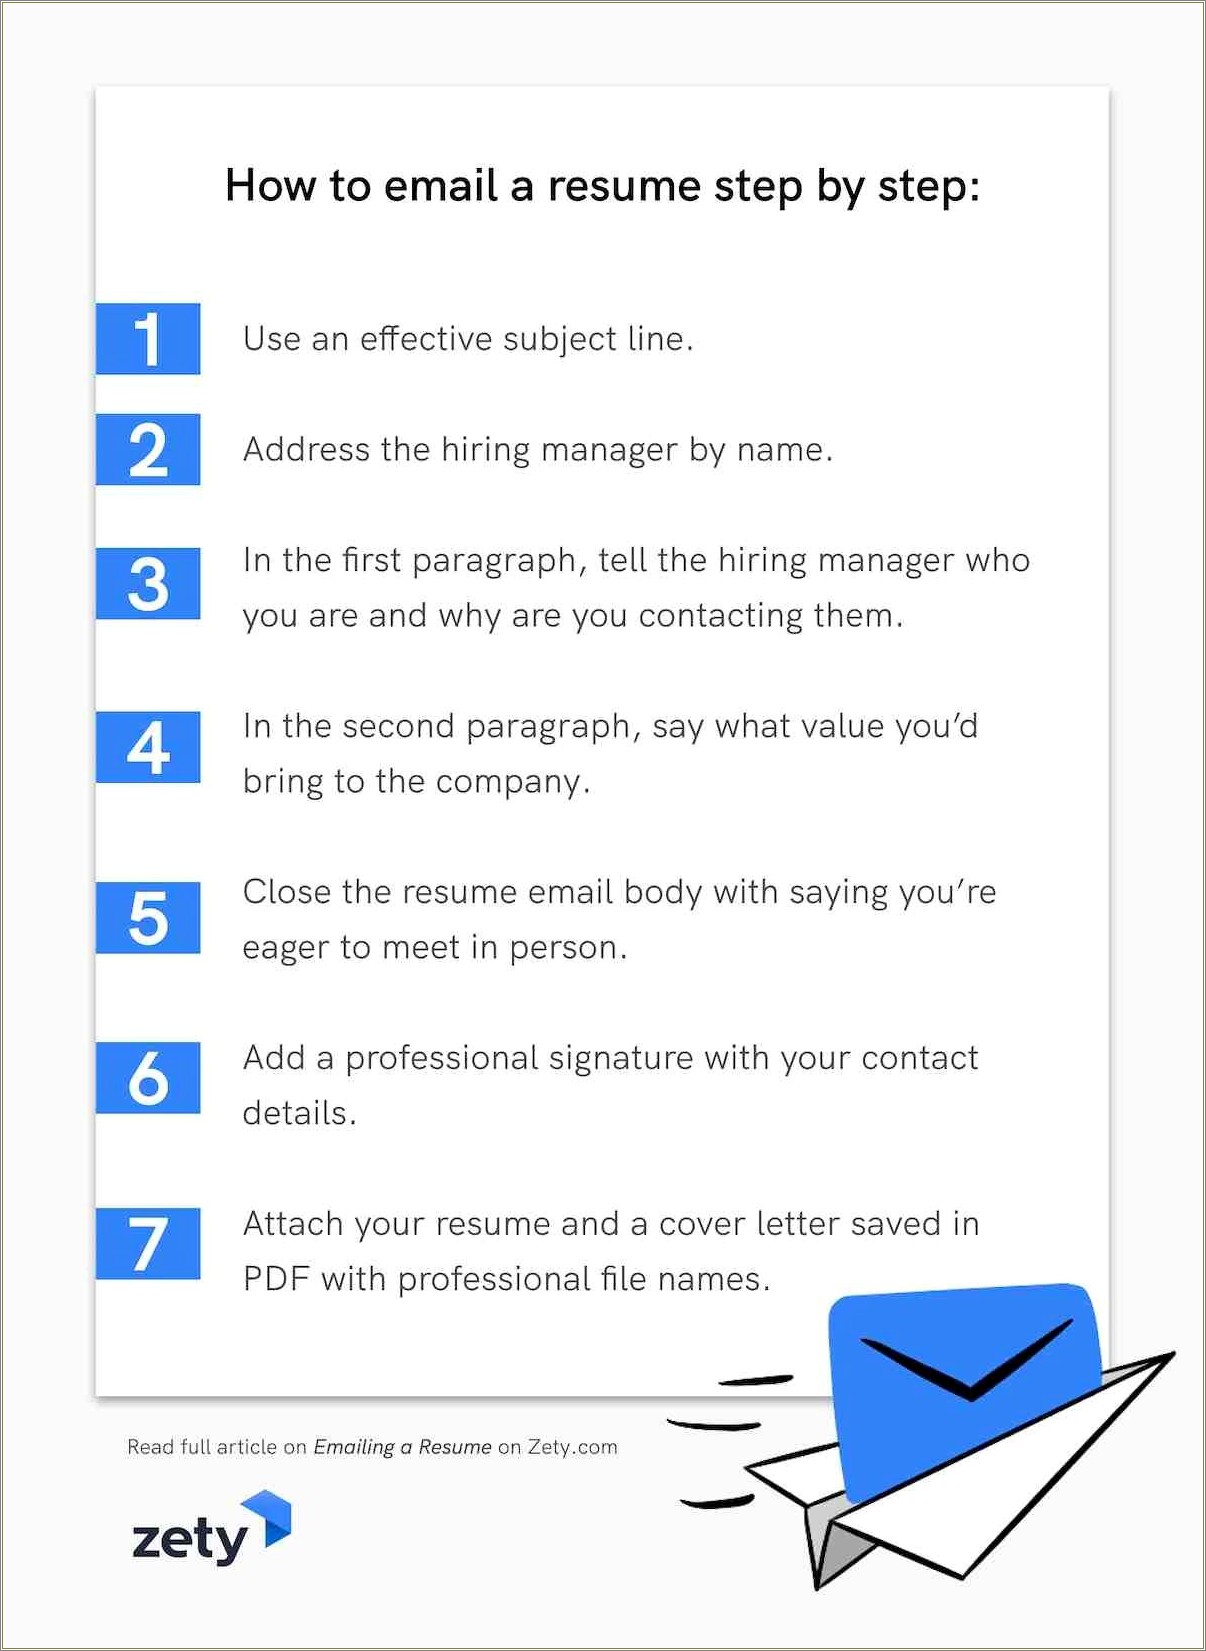 Best Email Services To Use For A Resume